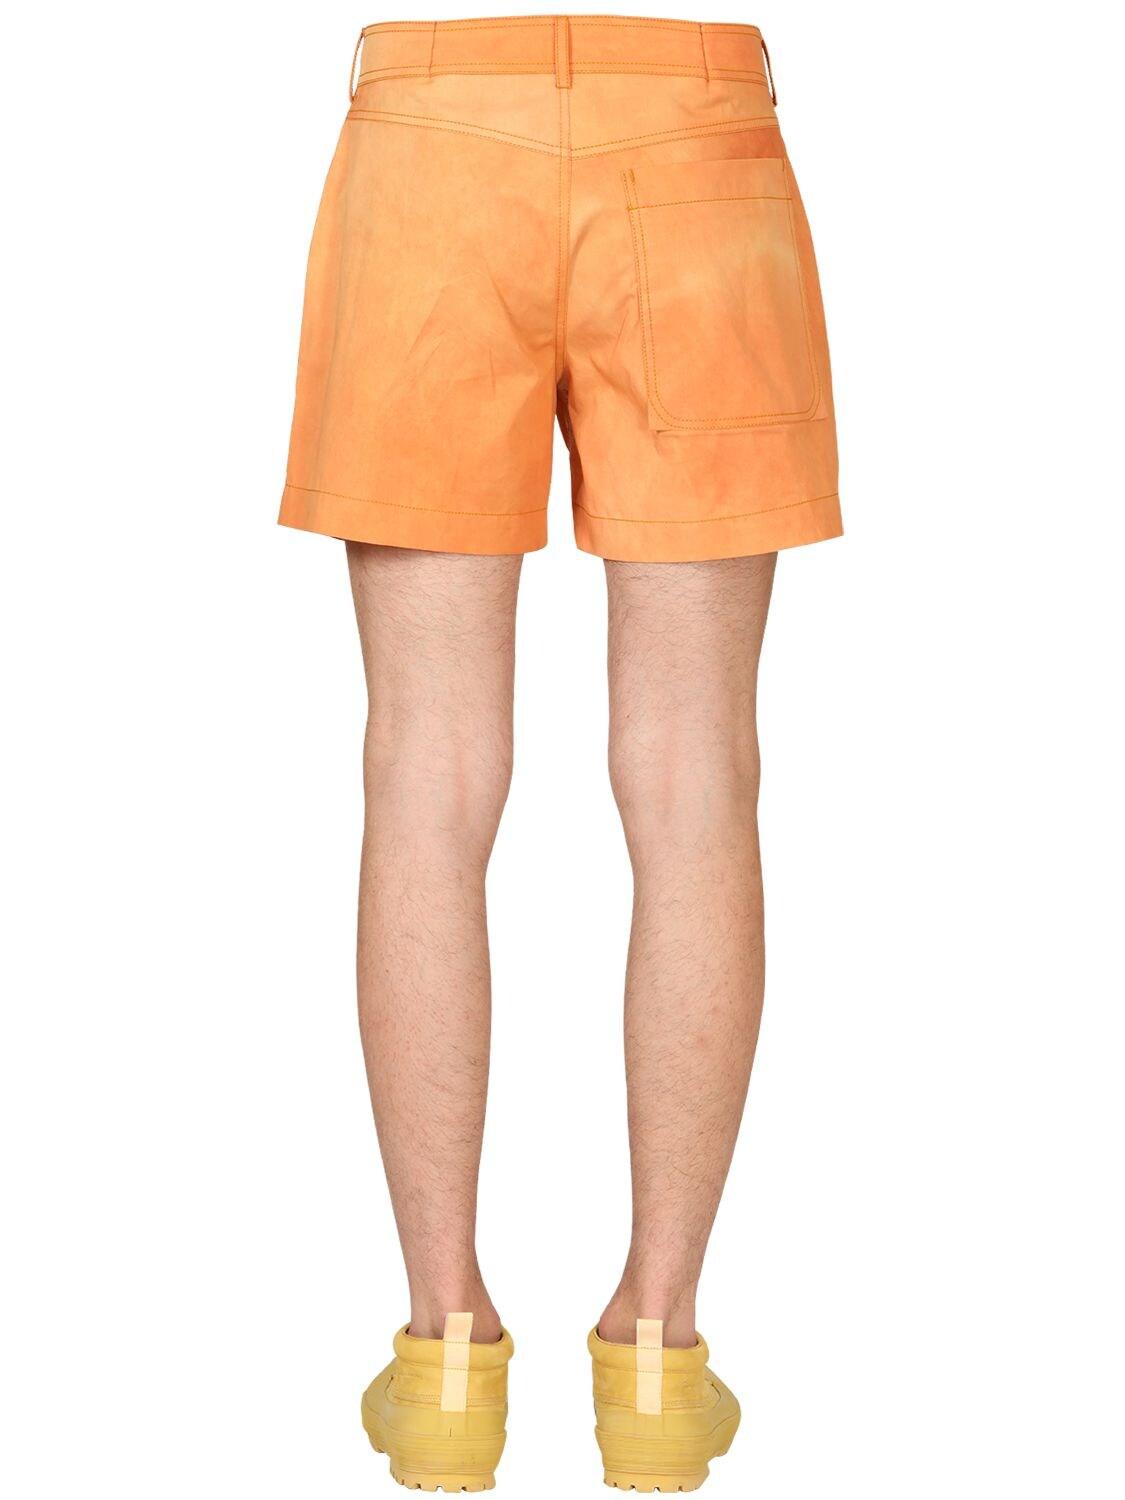 Jacquemus Pleated Cotton Canvas Shorts in Orange for Men - Lyst